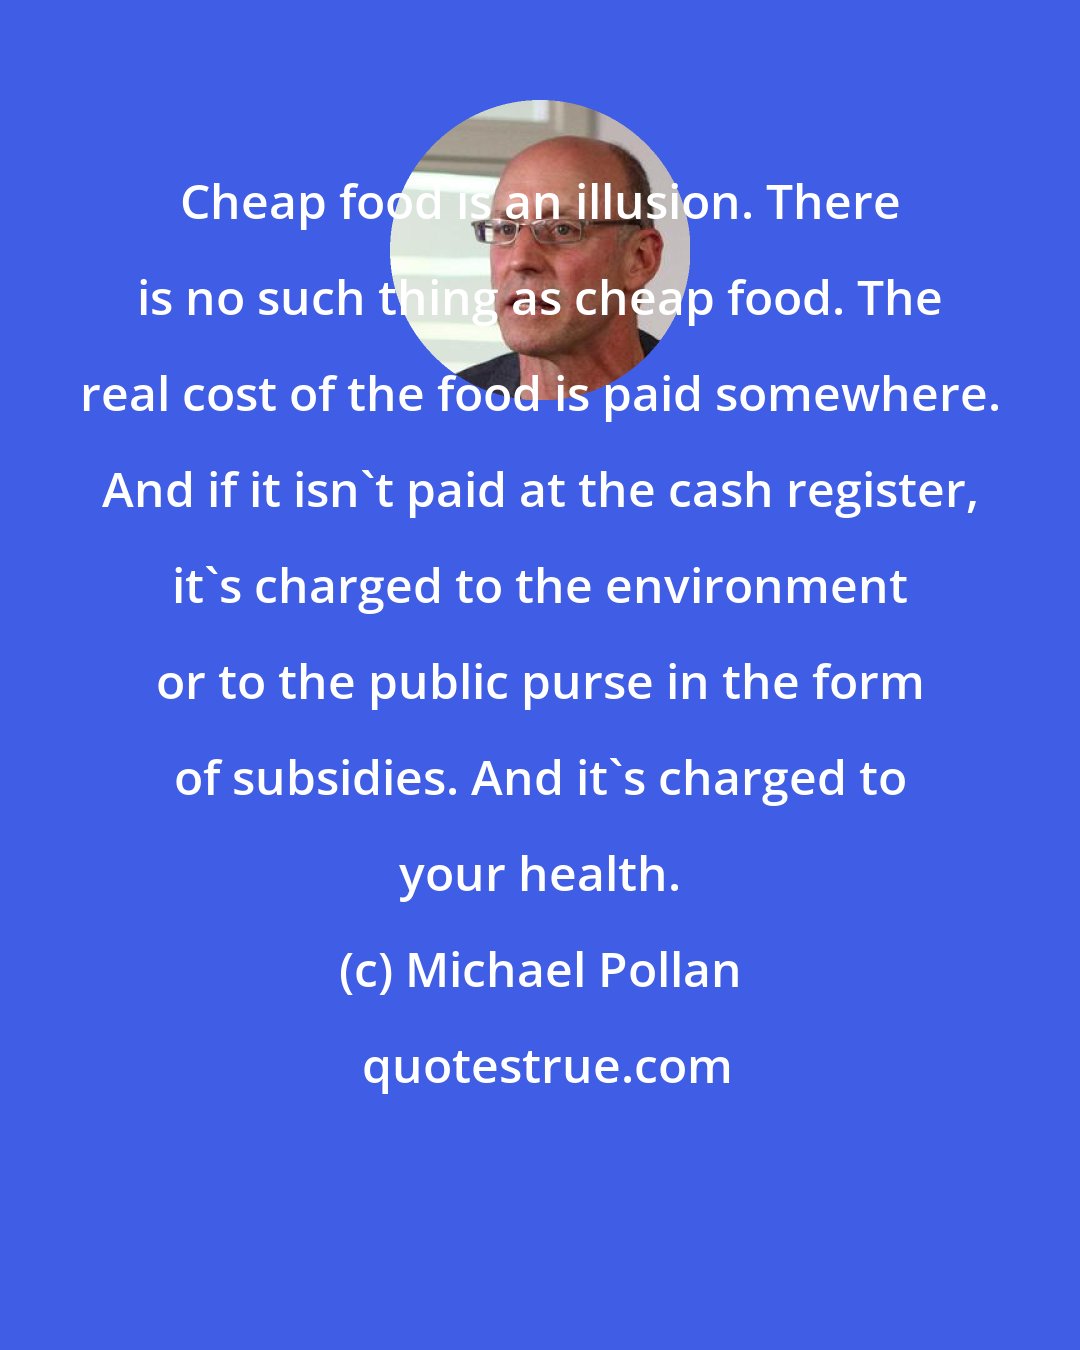 Michael Pollan: Cheap food is an illusion. There is no such thing as cheap food. The real cost of the food is paid somewhere. And if it isn't paid at the cash register, it's charged to the environment or to the public purse in the form of subsidies. And it's charged to your health.